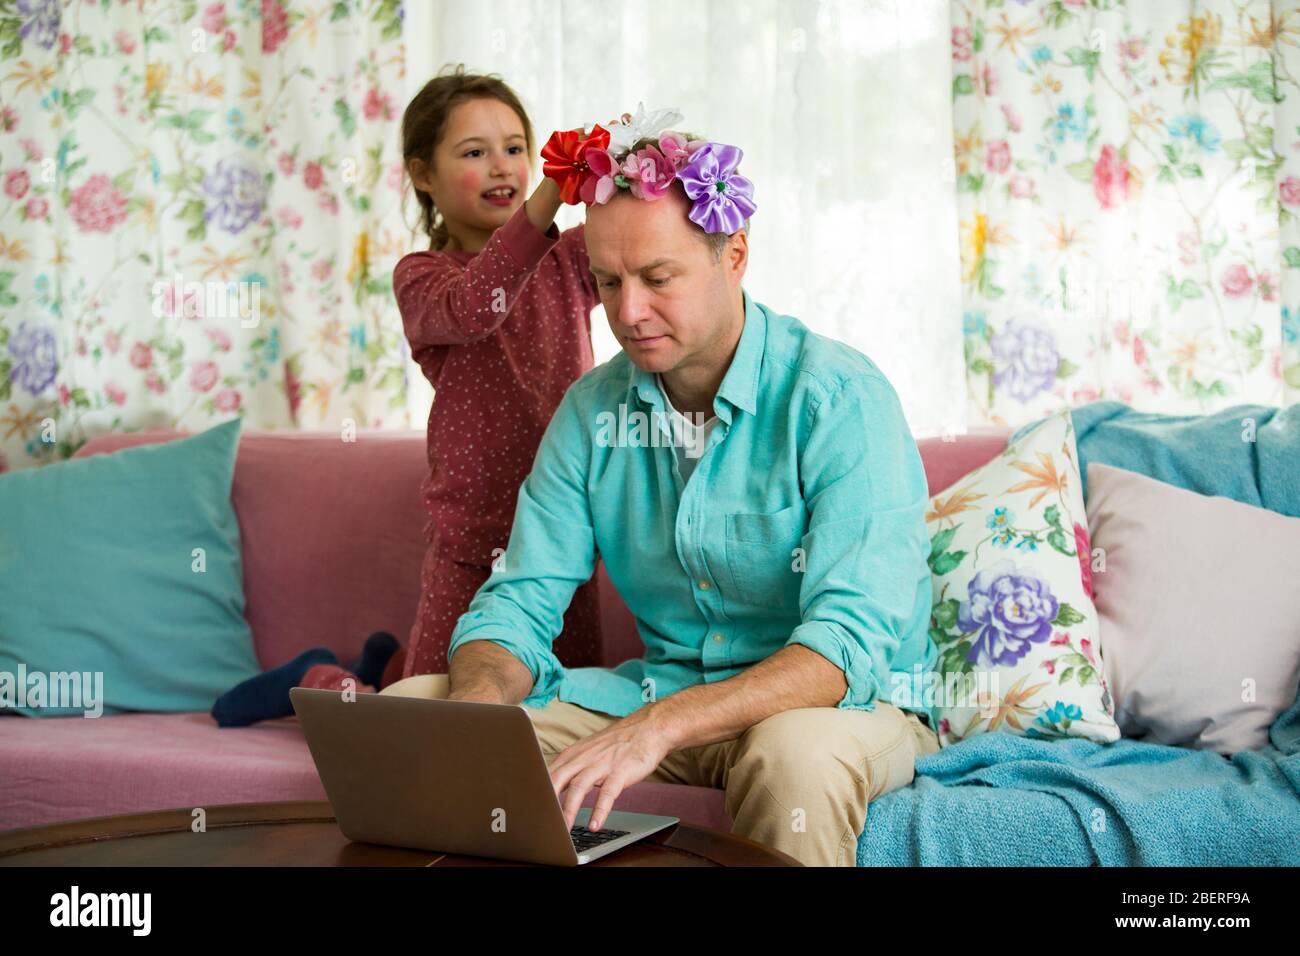 Child playing and disturbing father working remotely from home. Little girl combing daddy's hair and making hairstyle. Man on couch with laptop Stock Photo